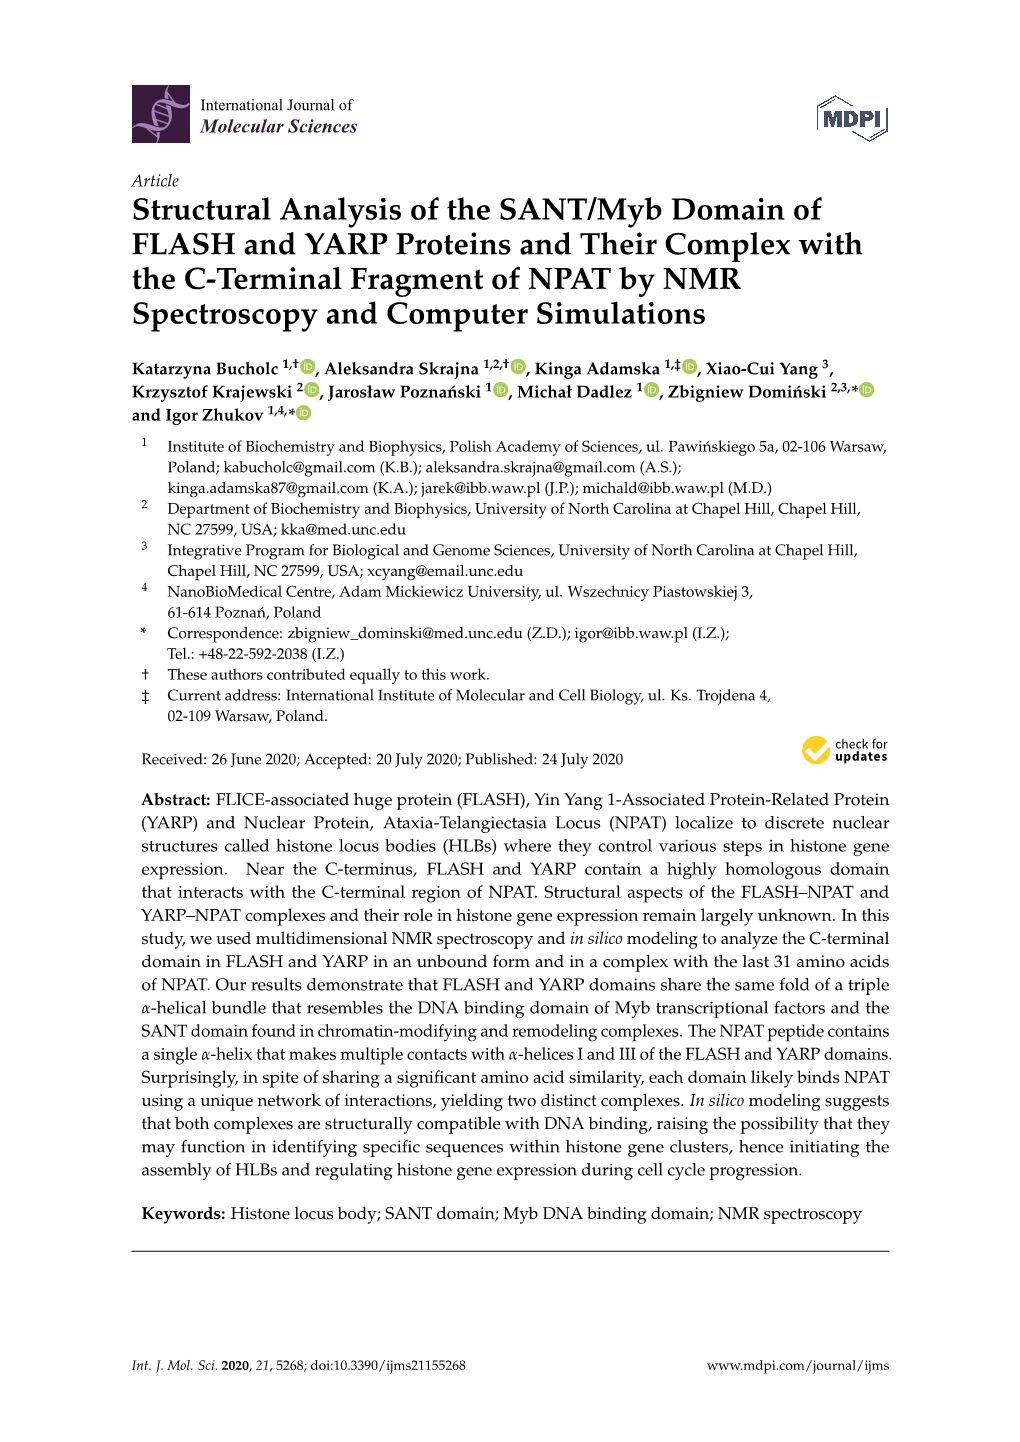 Structural Analysis of the SANT/Myb Domain of FLASH and YARP